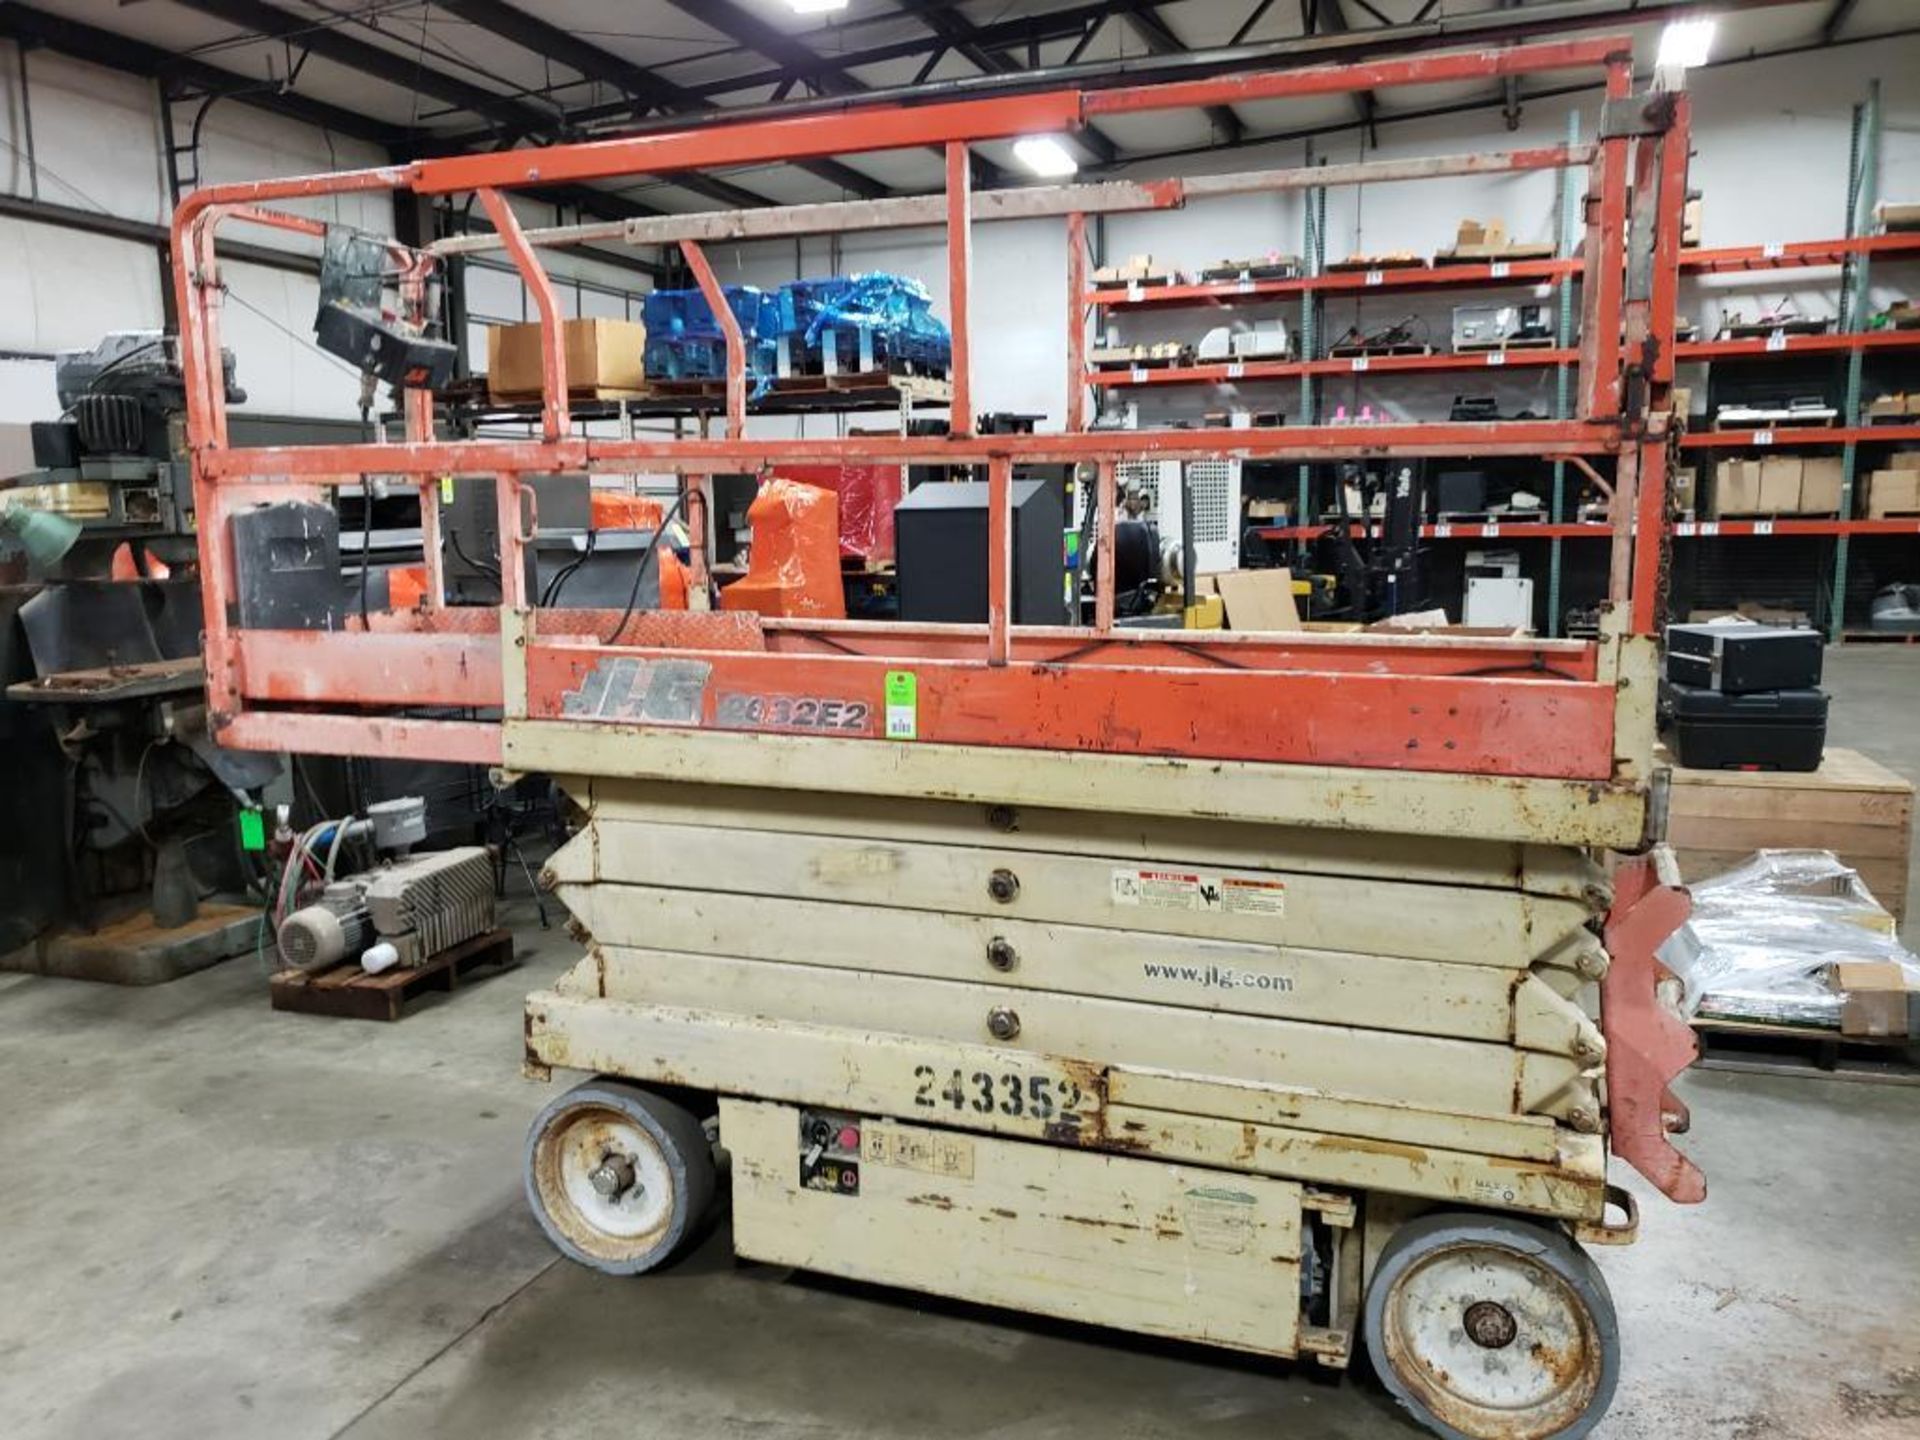 JLG Industries 2632E2 electric scissor lift. 26' lift 32" wide. YR 2003. Serial number 0200II2300. - Image 13 of 19